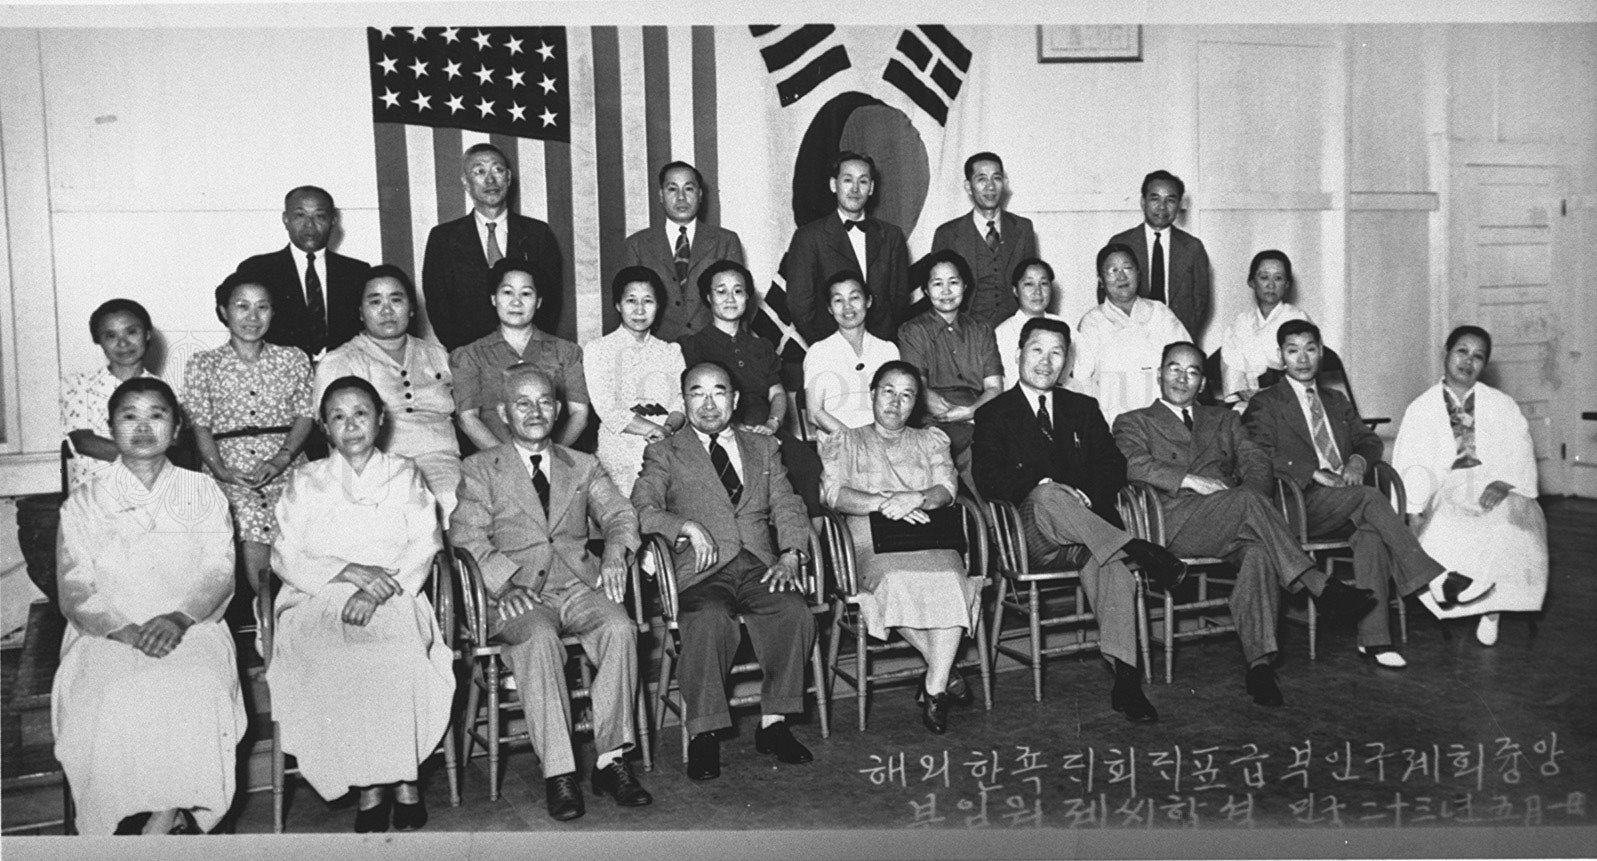 Deligates of the All Korean Overseas Convention and KWRS Central Committee leaders, 1941 (Independence Hall of Korea)